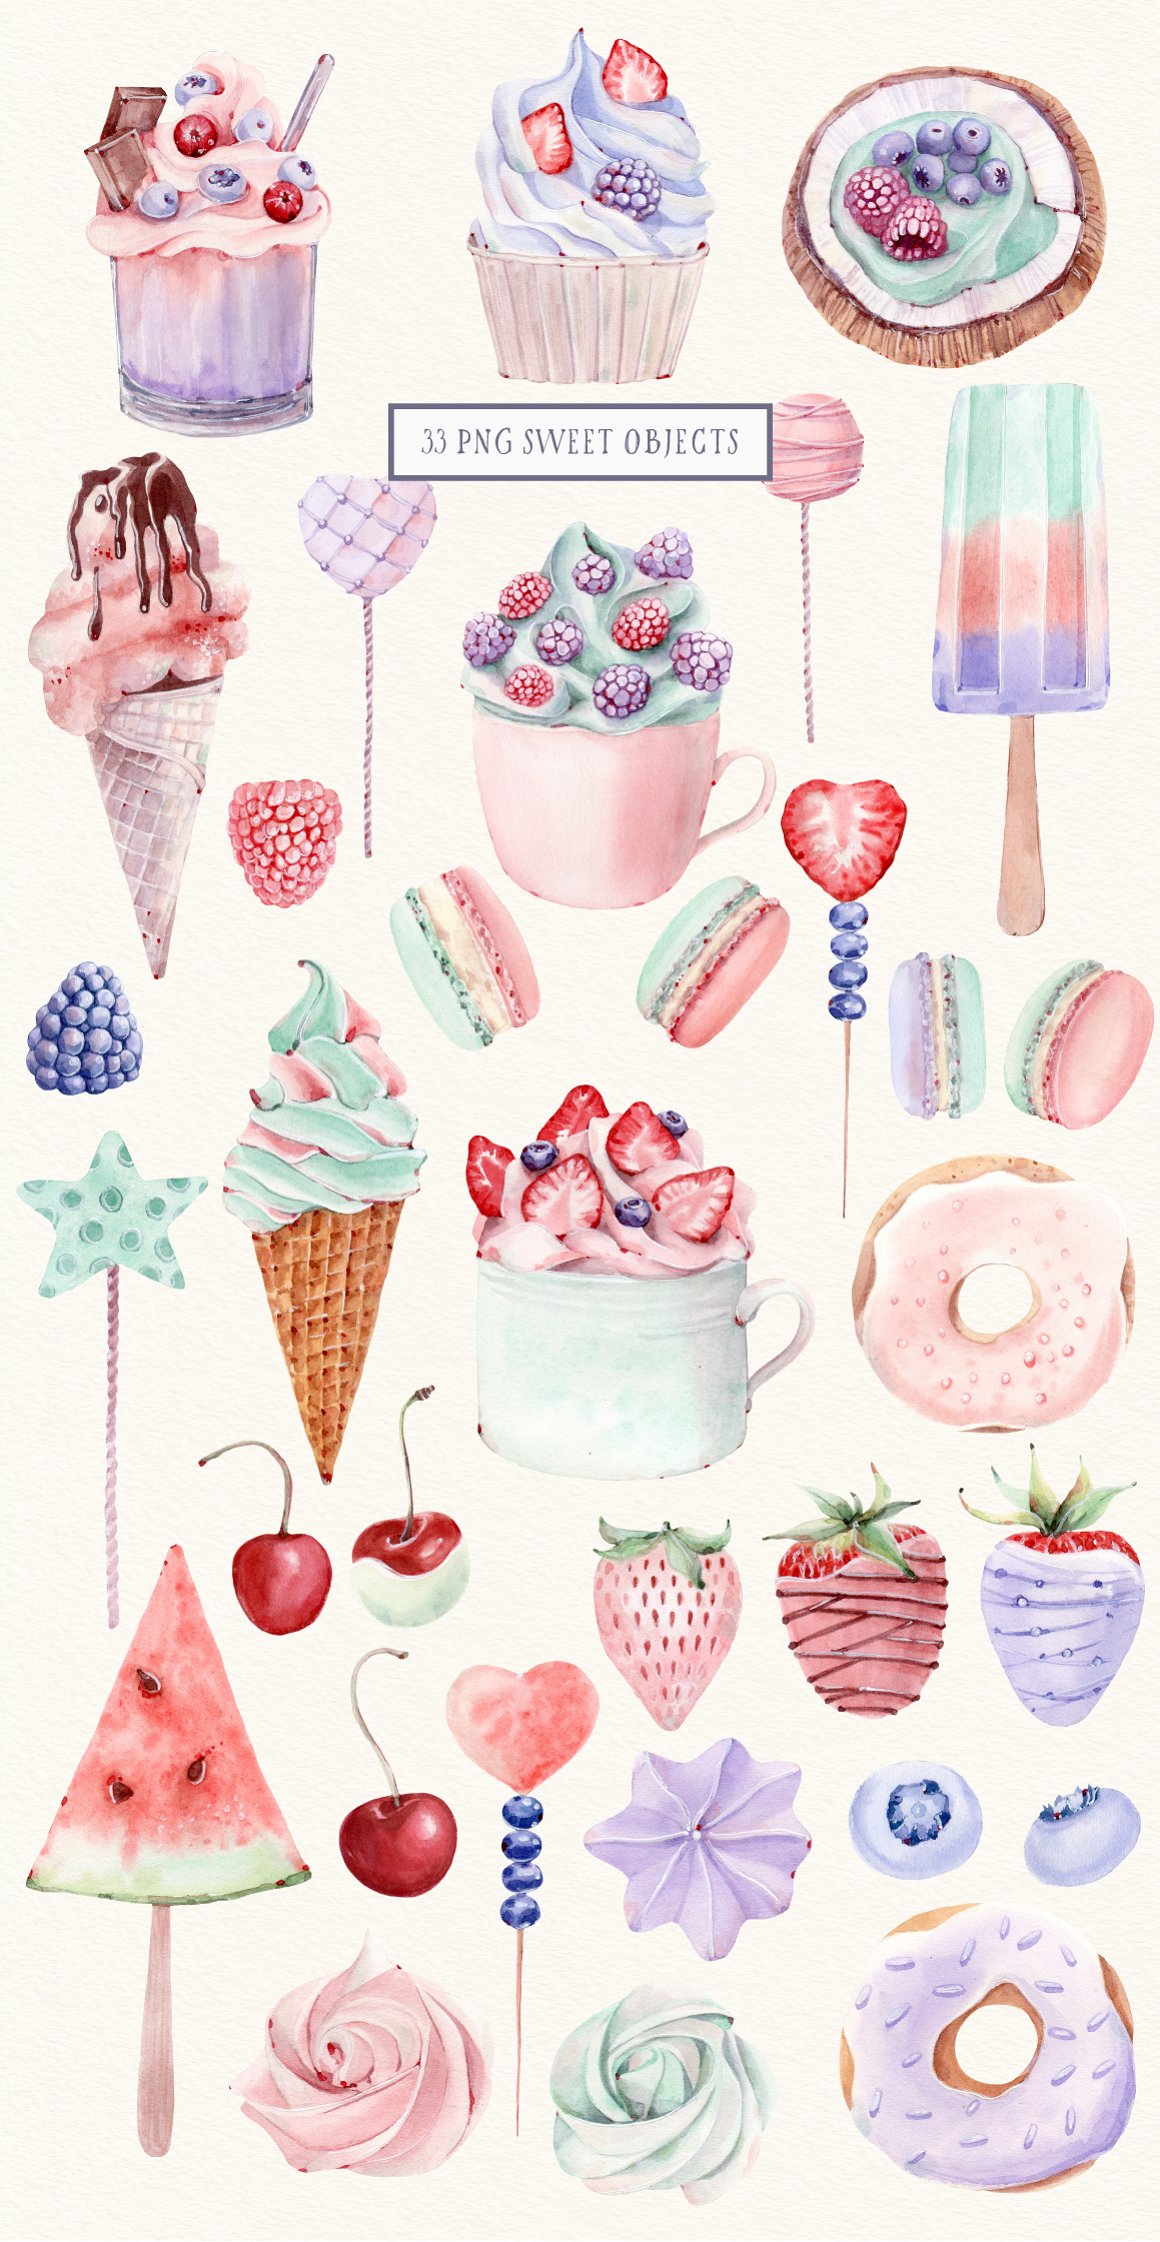 A set of 33 different illustrations of sweet objects on a gray background.